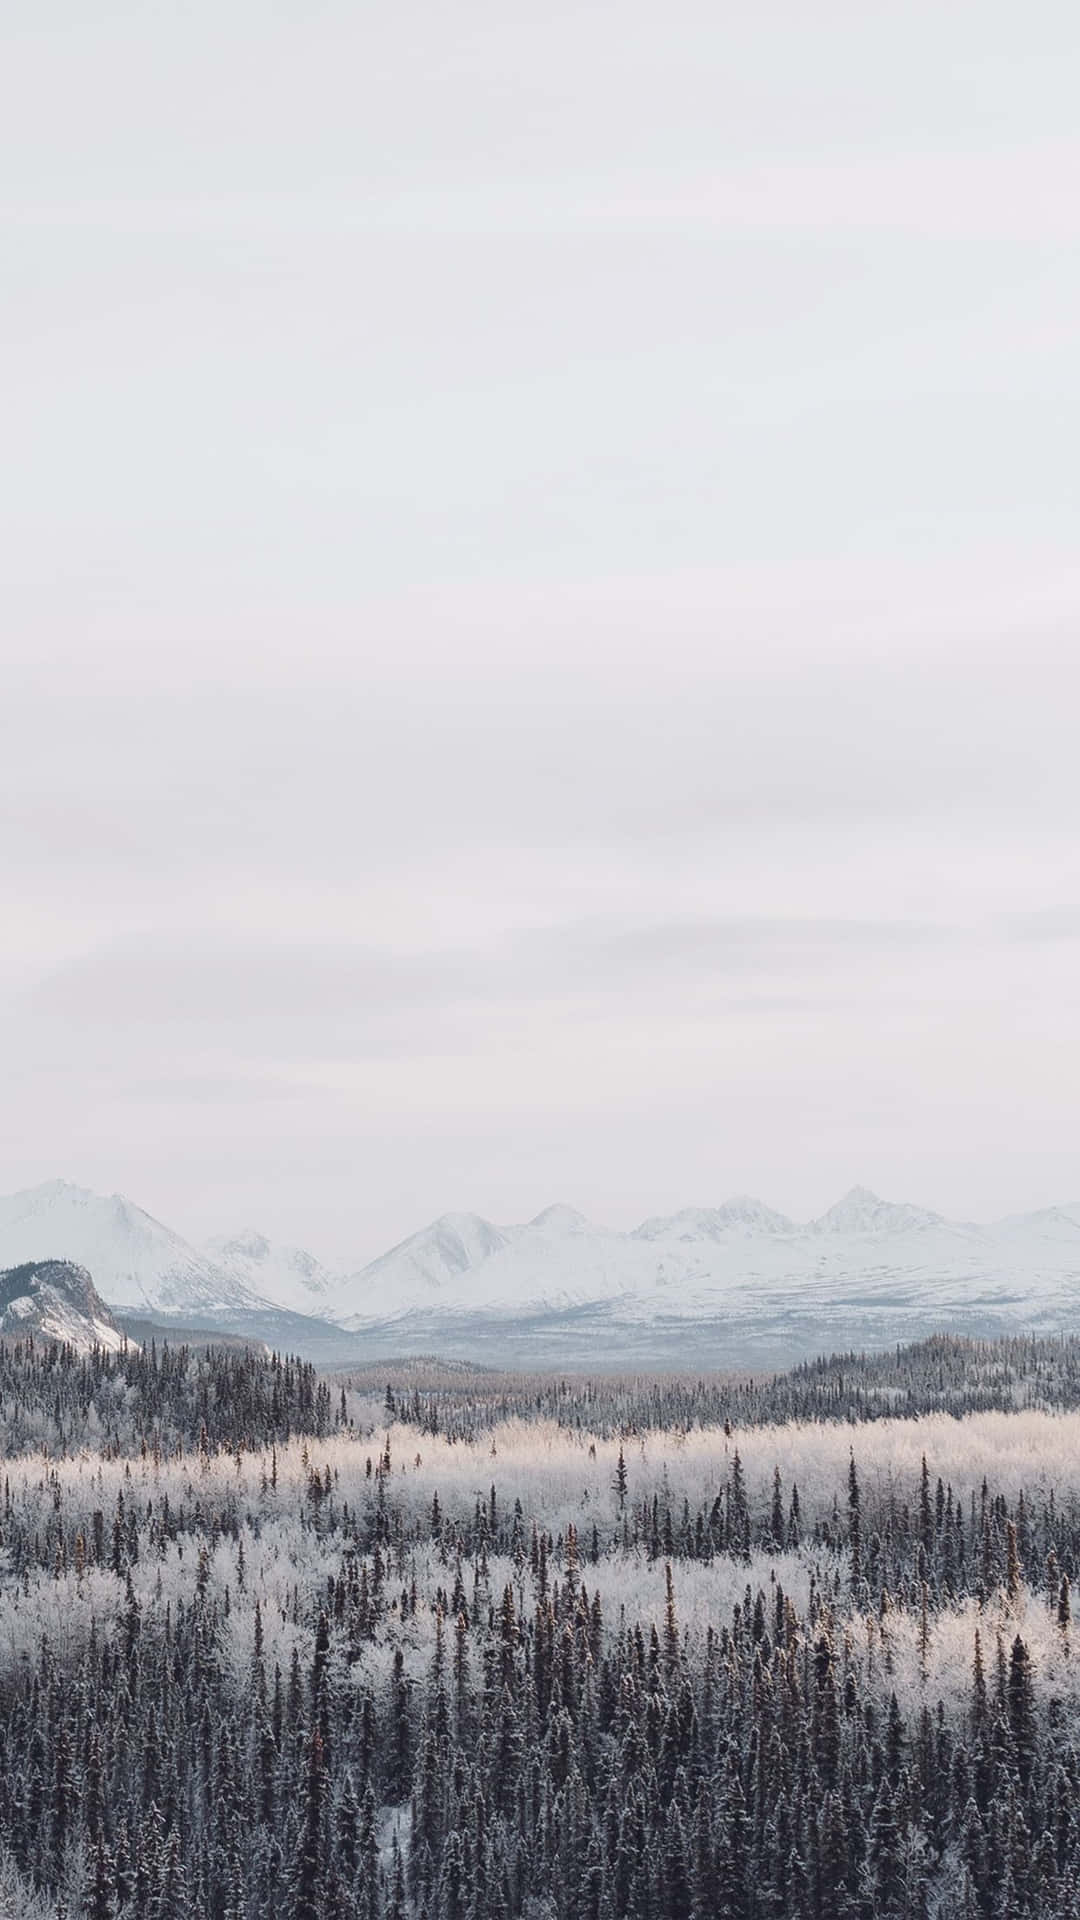 A Fresh Scene of Winter with an Iphone 6 Plus Wallpaper